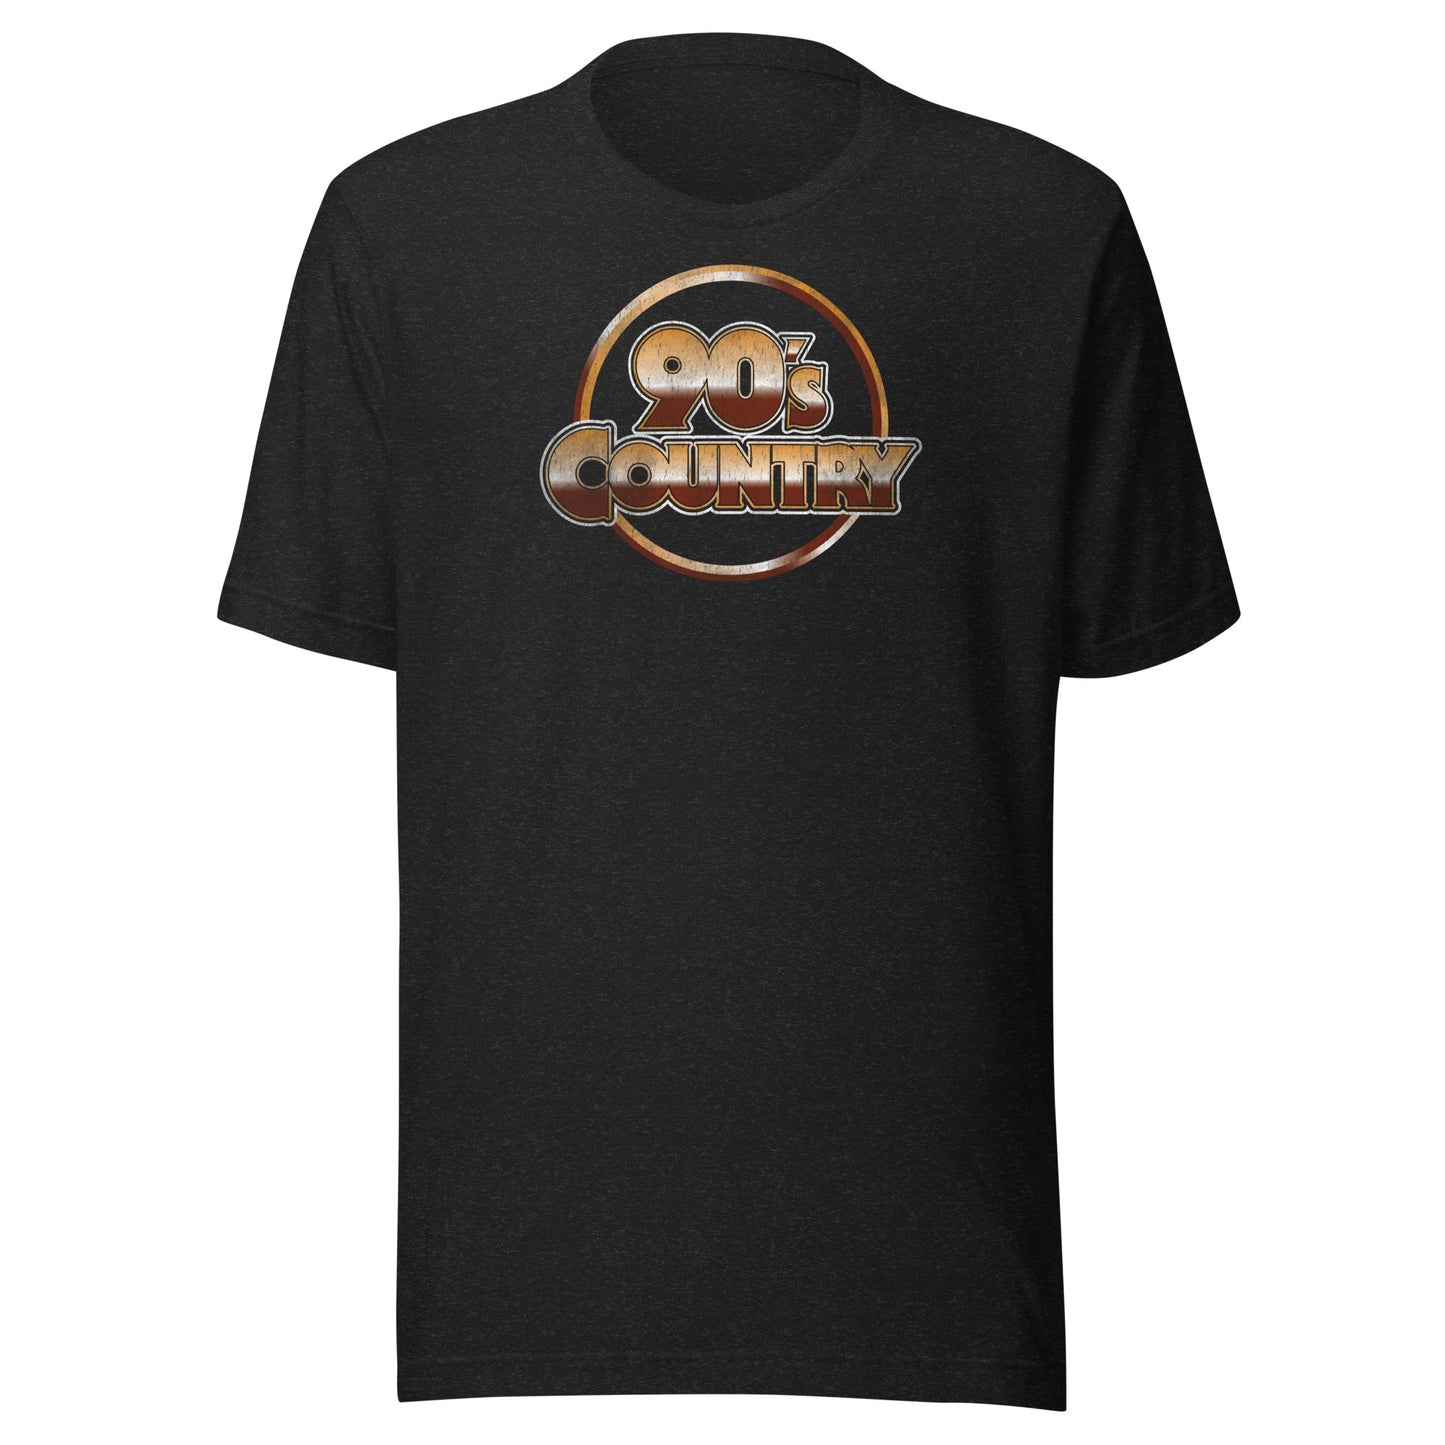 T-Shirt - 90's Country